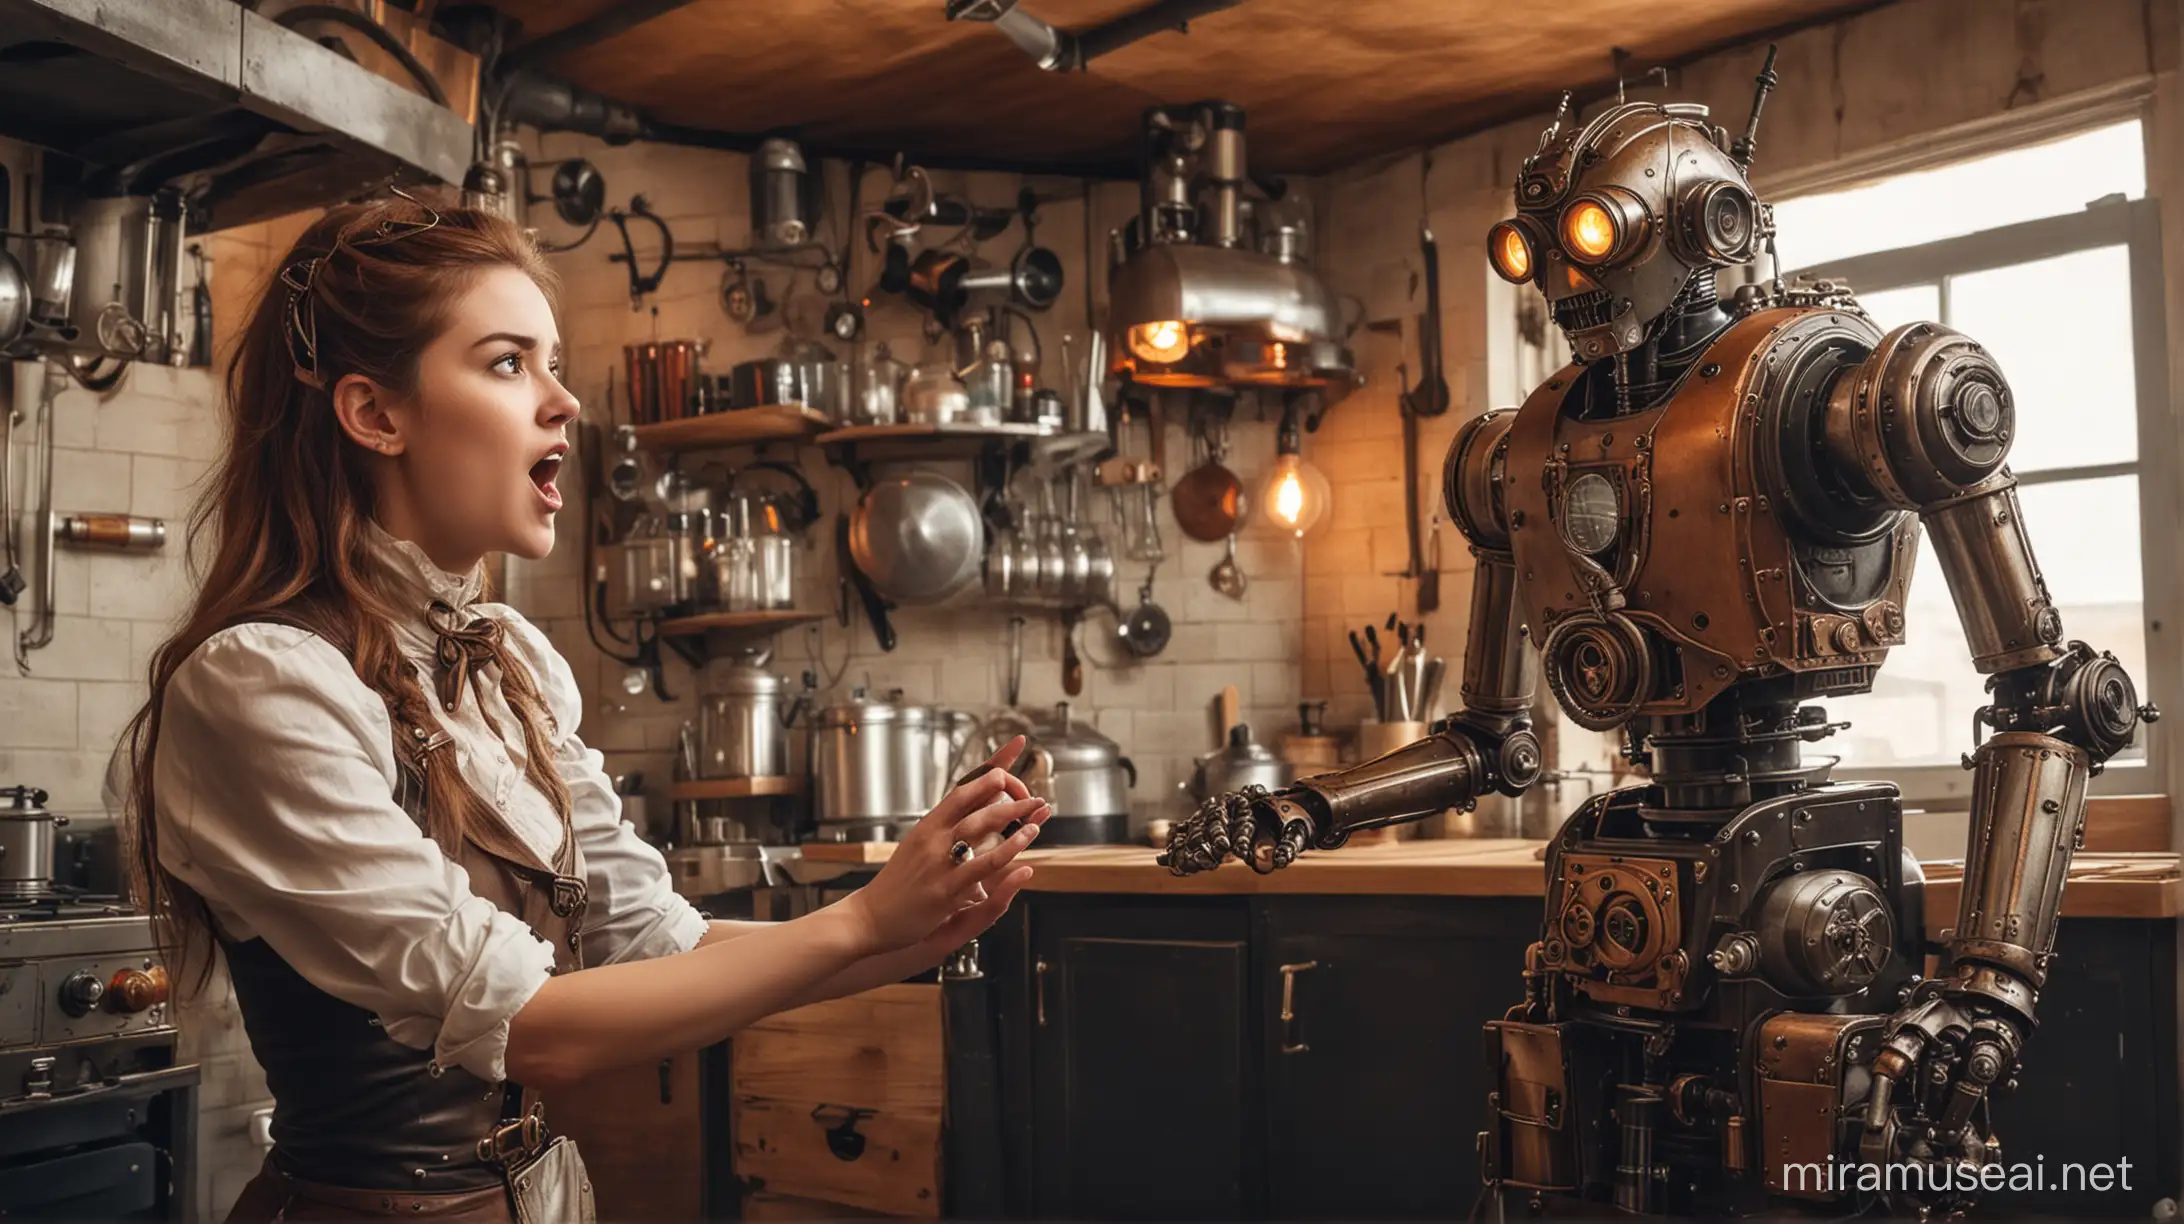 Steampunk Woman Arguing with Robot in Kitchen